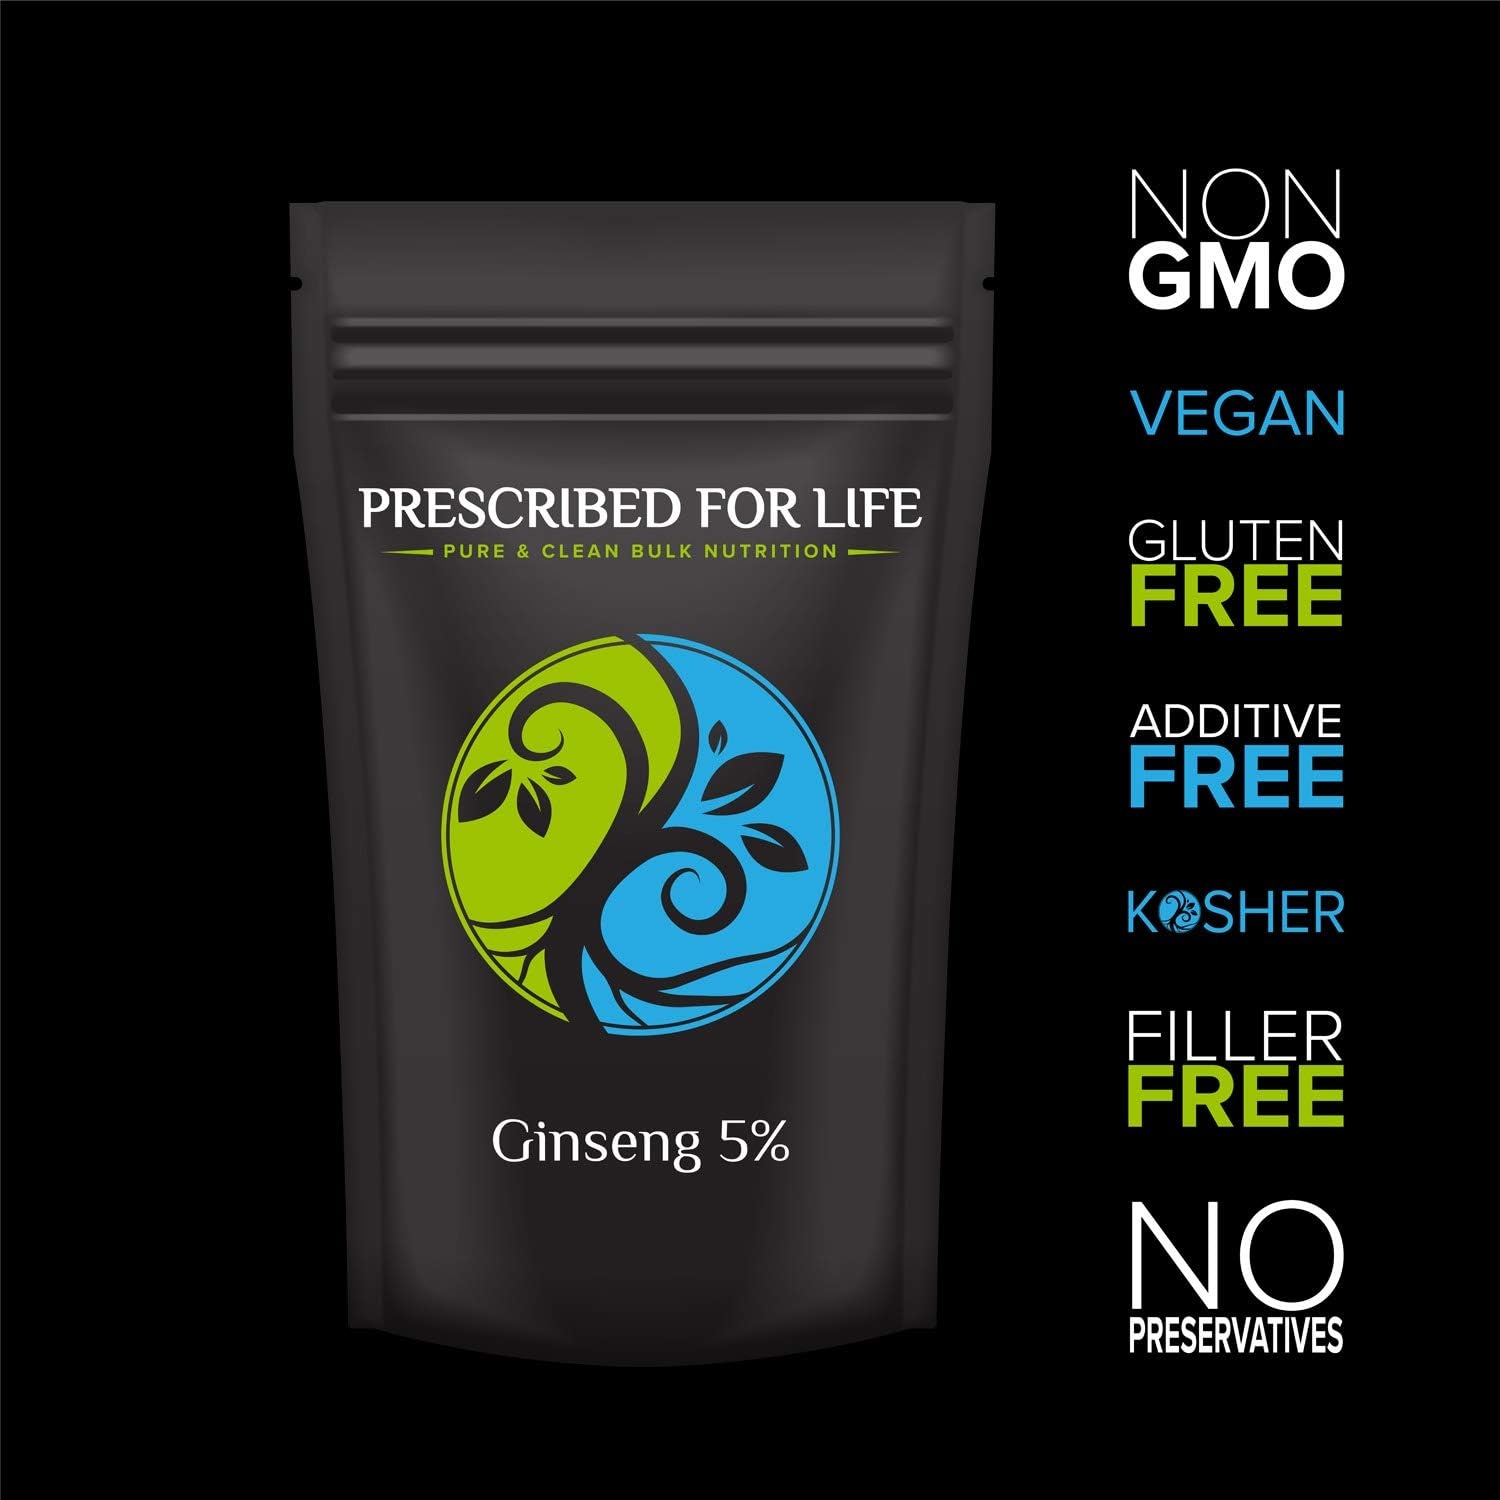 Prescribed for Life Ginseng - 5% Ginsenoside - Natural Panax Root Fine Powder Extract (Panax Ginseng), 1 kg